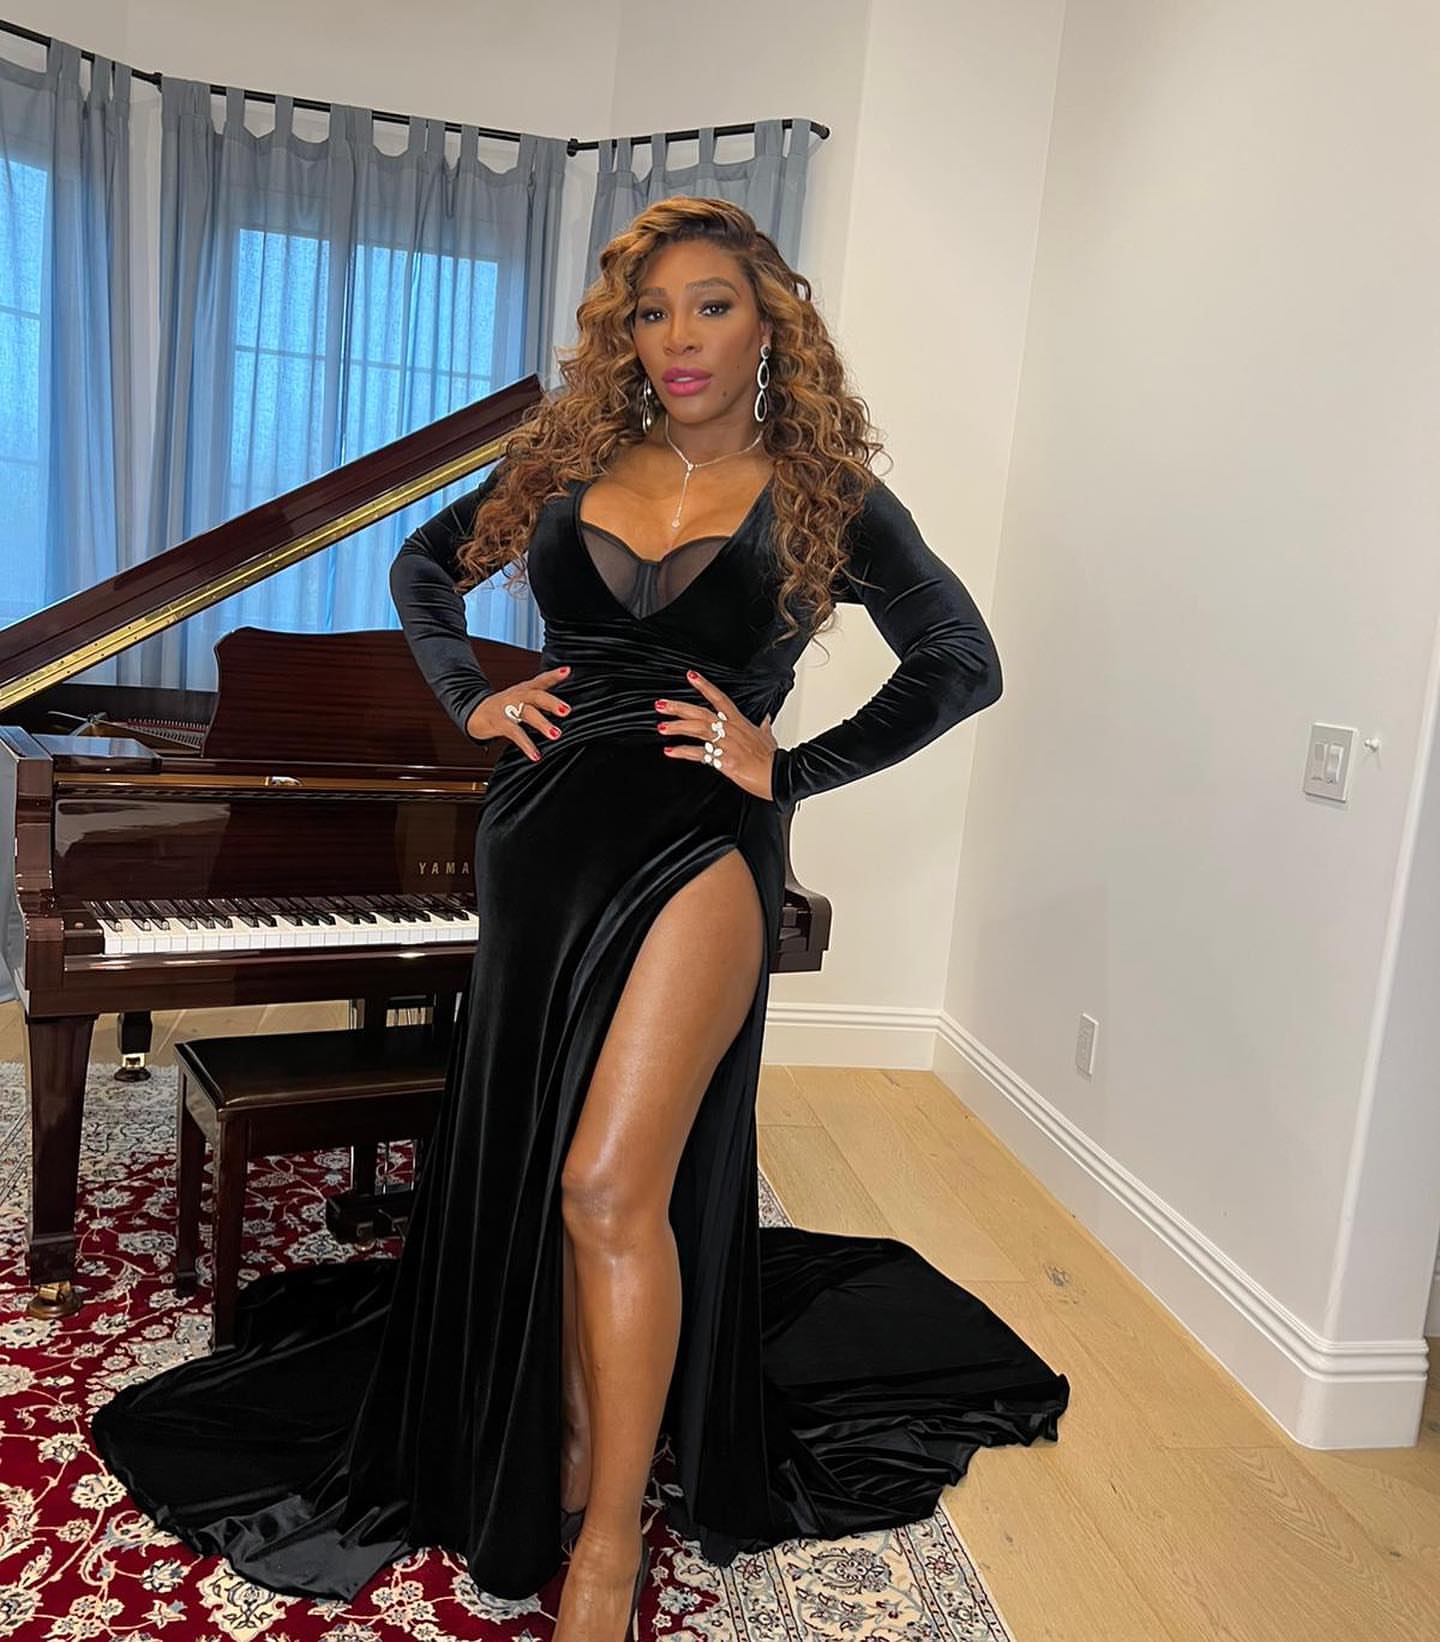 Photos n°16 : Serena Williams Shares Her Big Reveal!